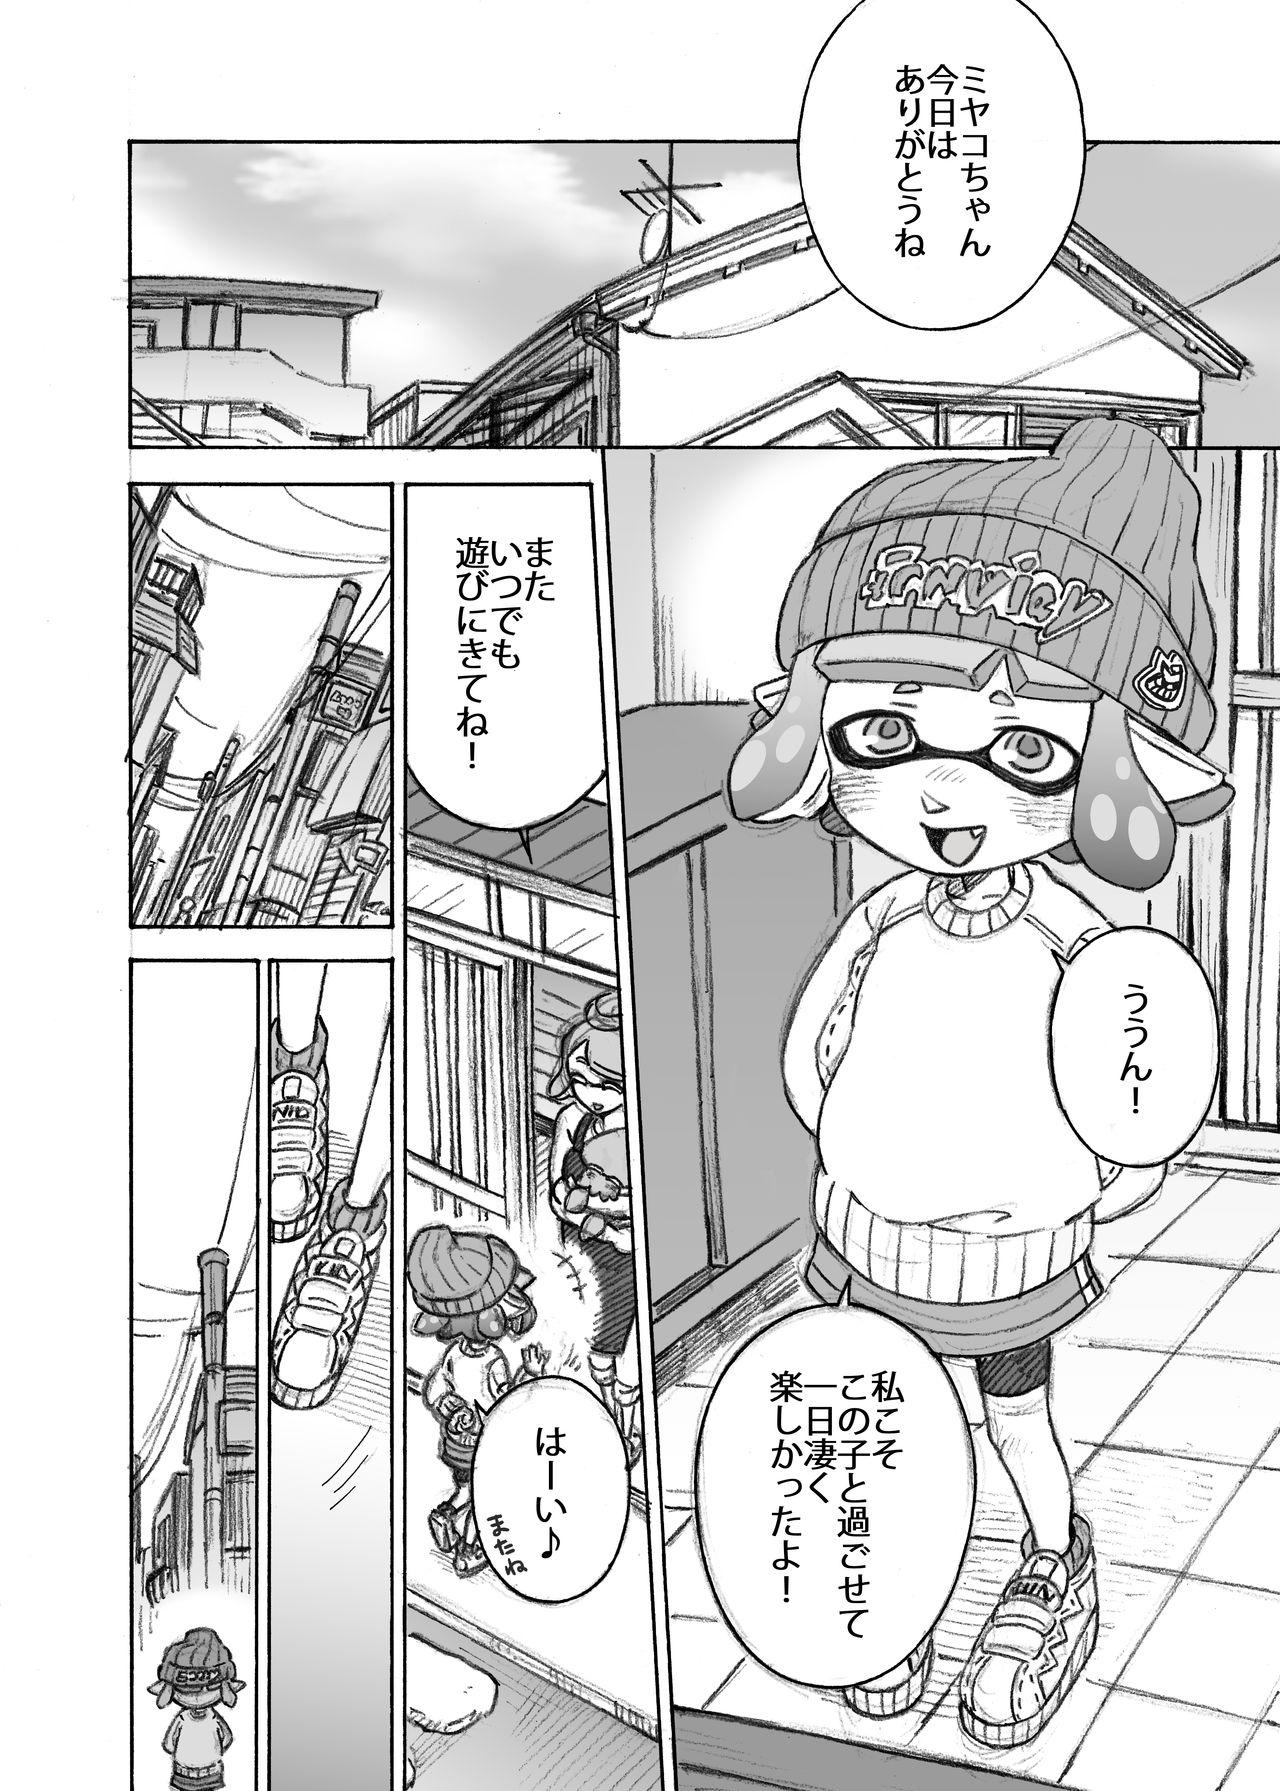 Deep Let's make that anxious daughter a mama - Splatoon Perfect Girl Porn - Page 6